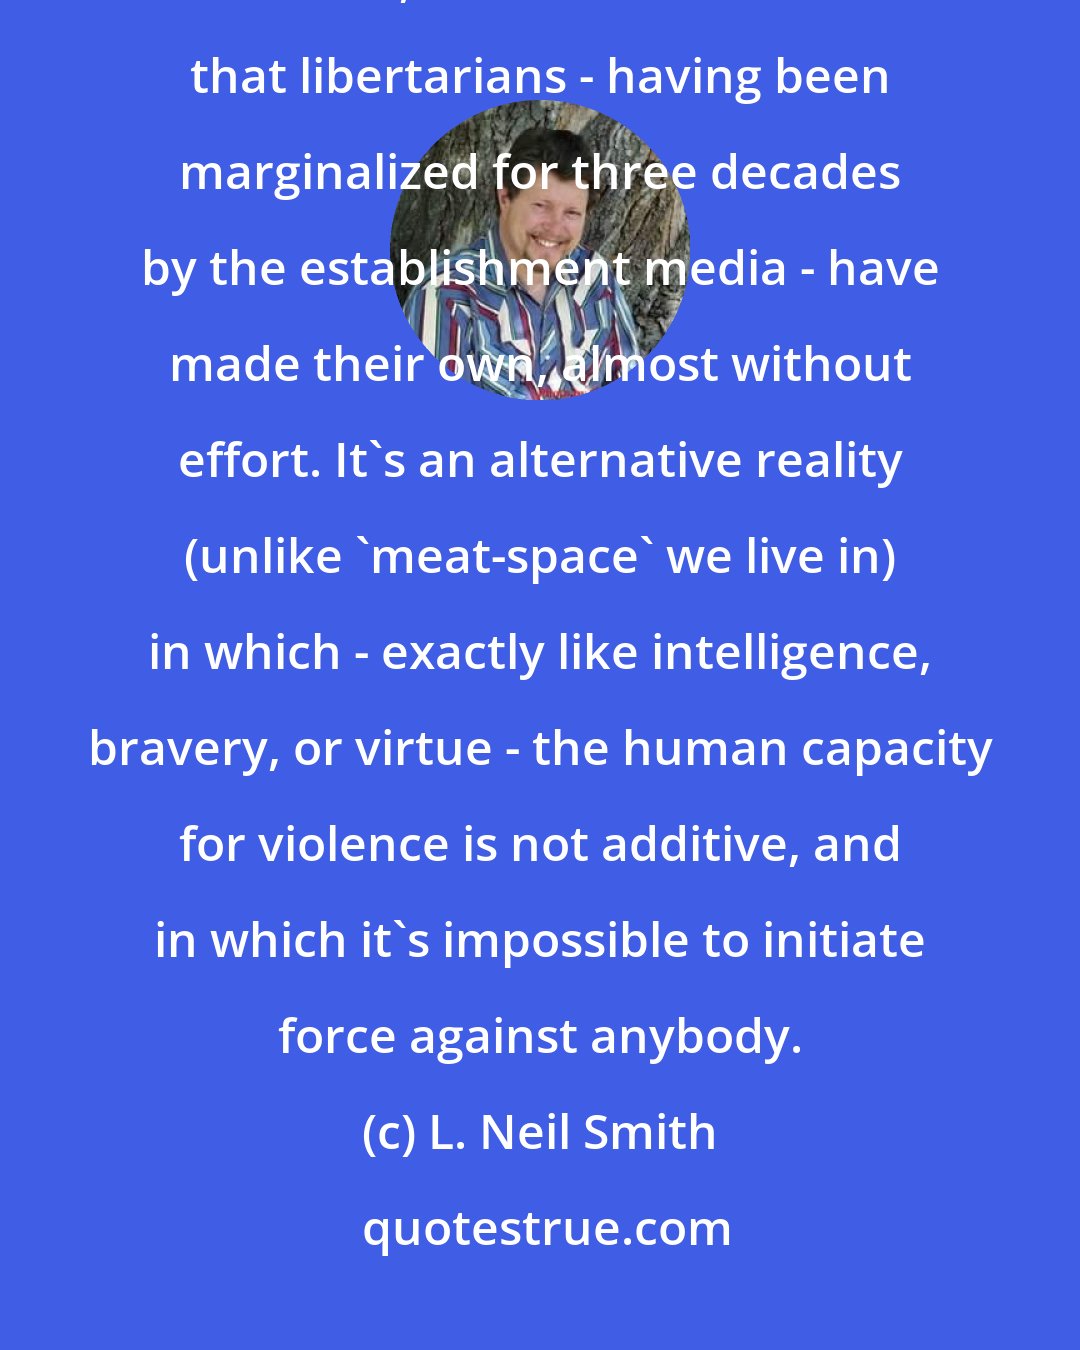 L. Neil Smith: Possibly worst of all, from the standpoint of the dedicated enemies of freedom, the Internet is a world that libertarians - having been marginalized for three decades by the establishment media - have made their own, almost without effort. It's an alternative reality (unlike 'meat-space' we live in) in which - exactly like intelligence, bravery, or virtue - the human capacity for violence is not additive, and in which it's impossible to initiate force against anybody.